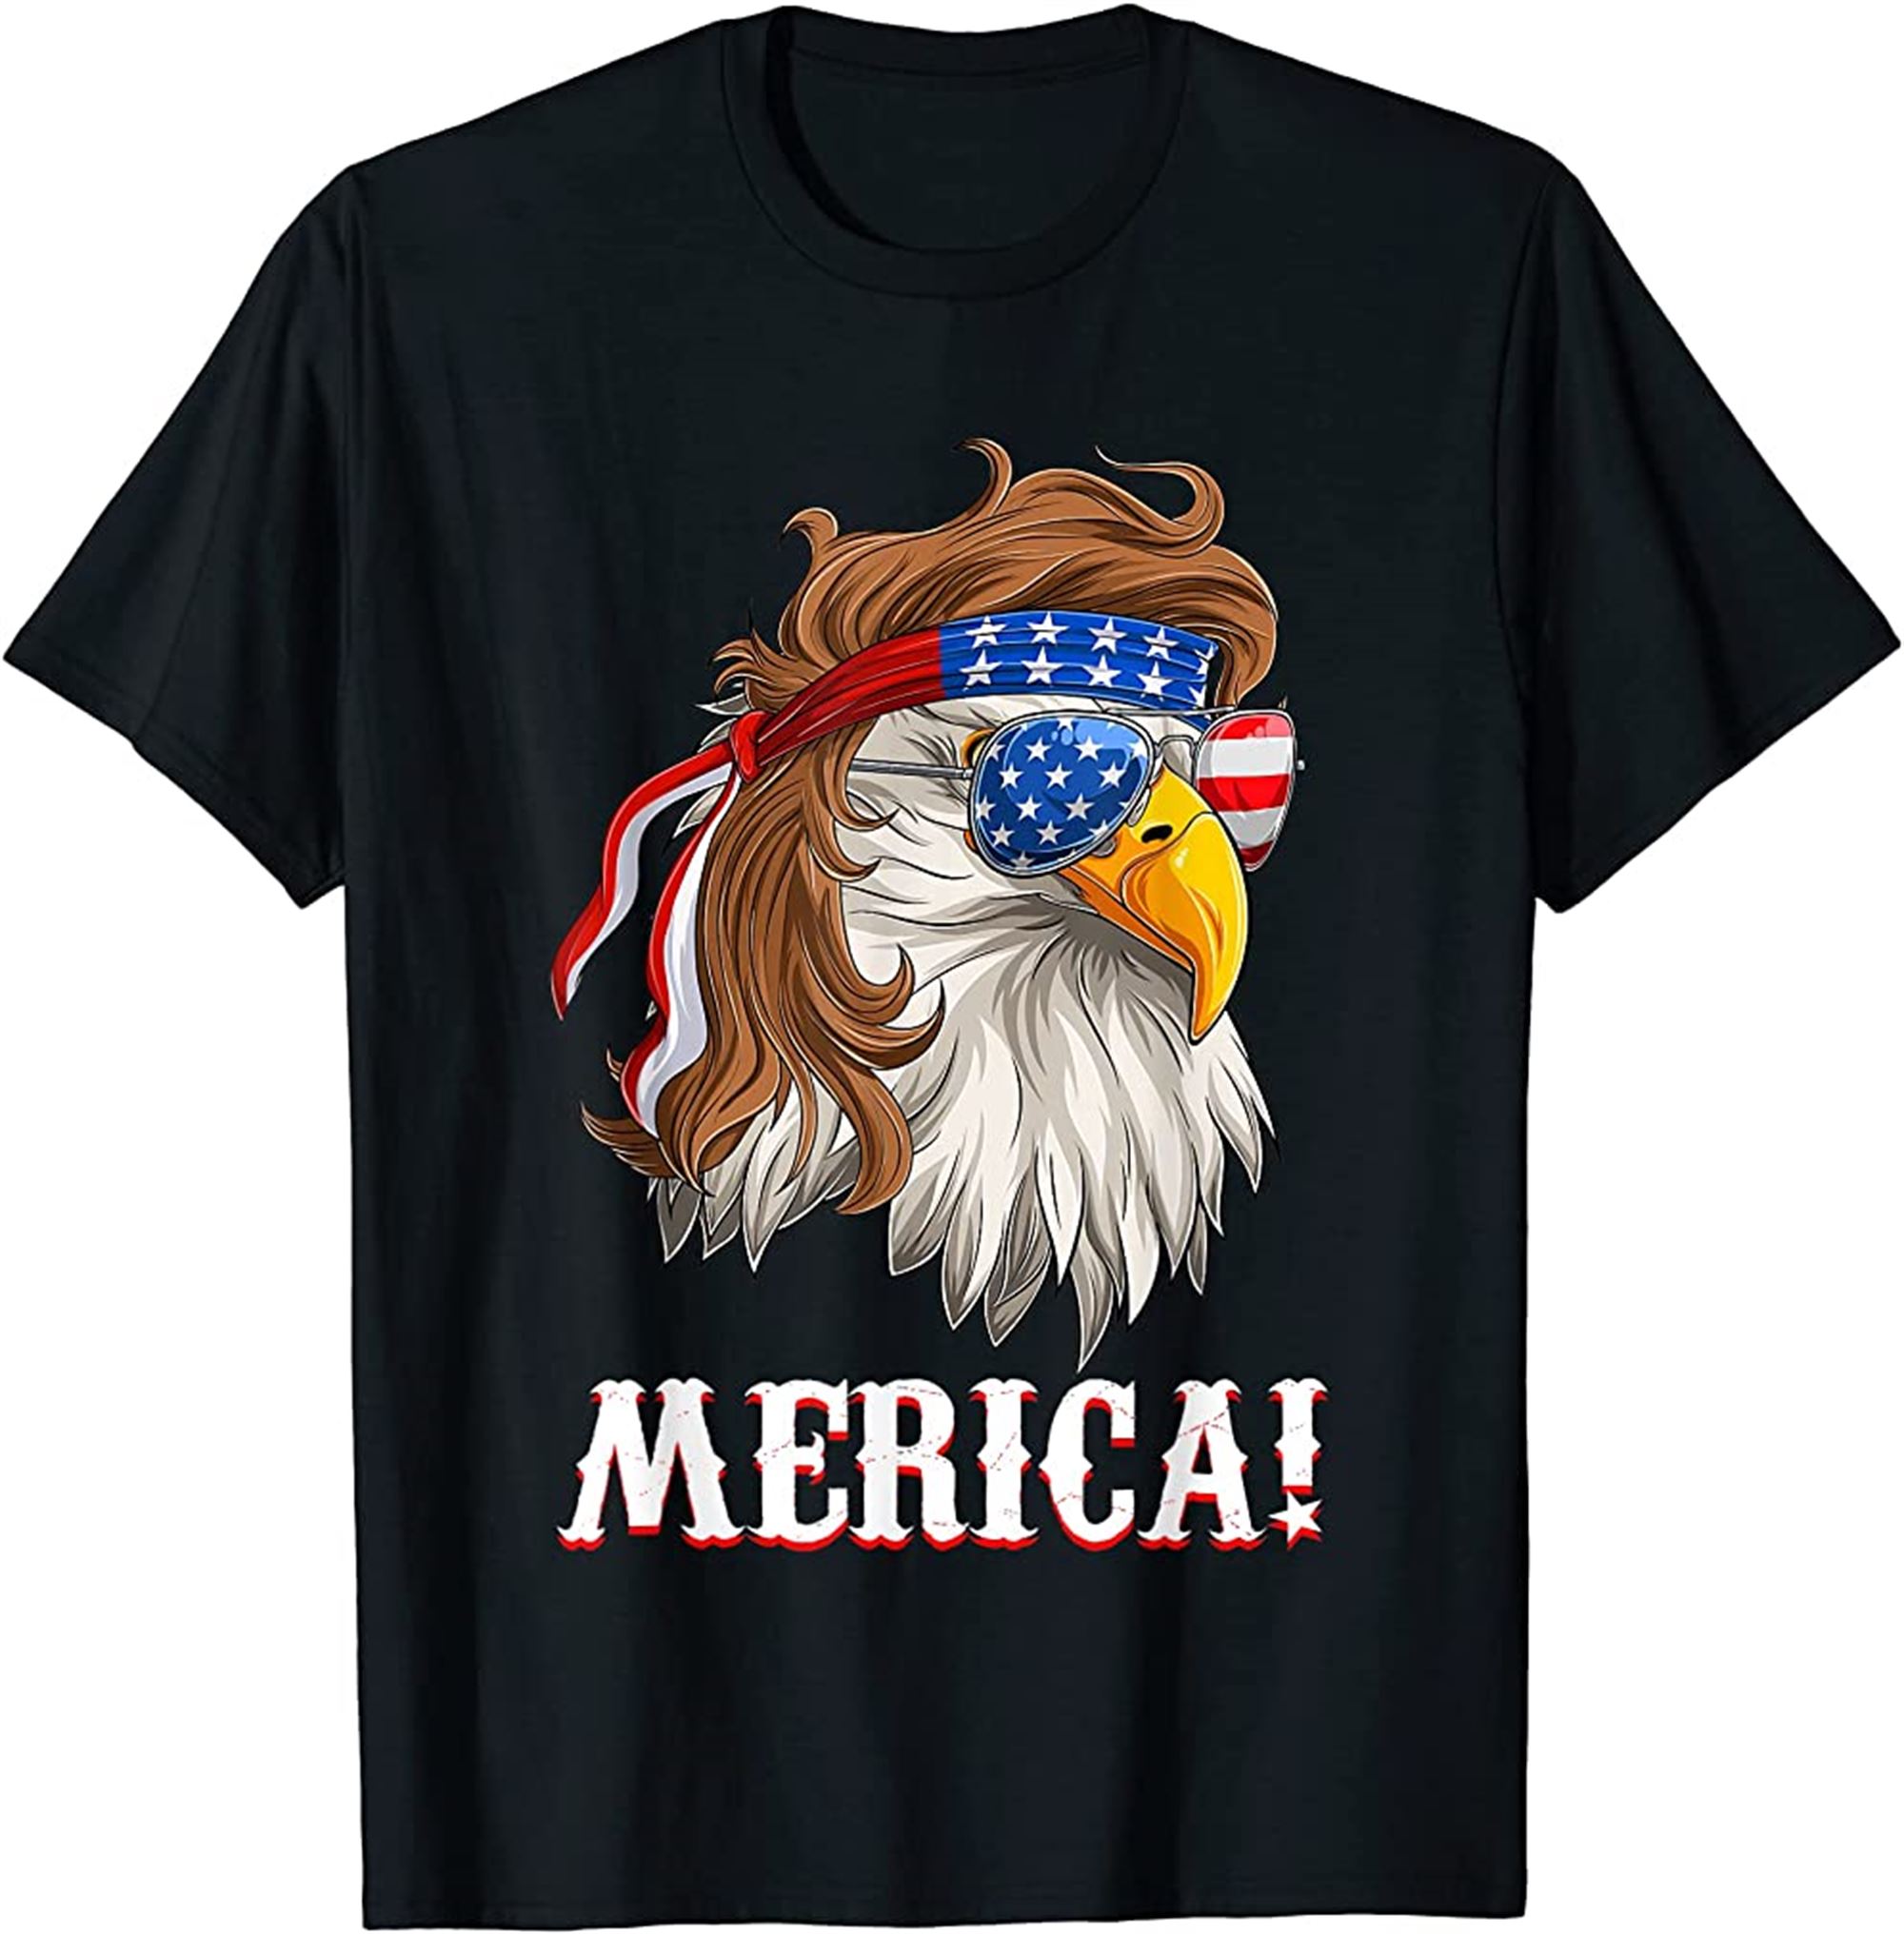 Merica American Eagle Mullet Shirt Fourth Of July Patriotic T-shirt Full Size Up To 5xl